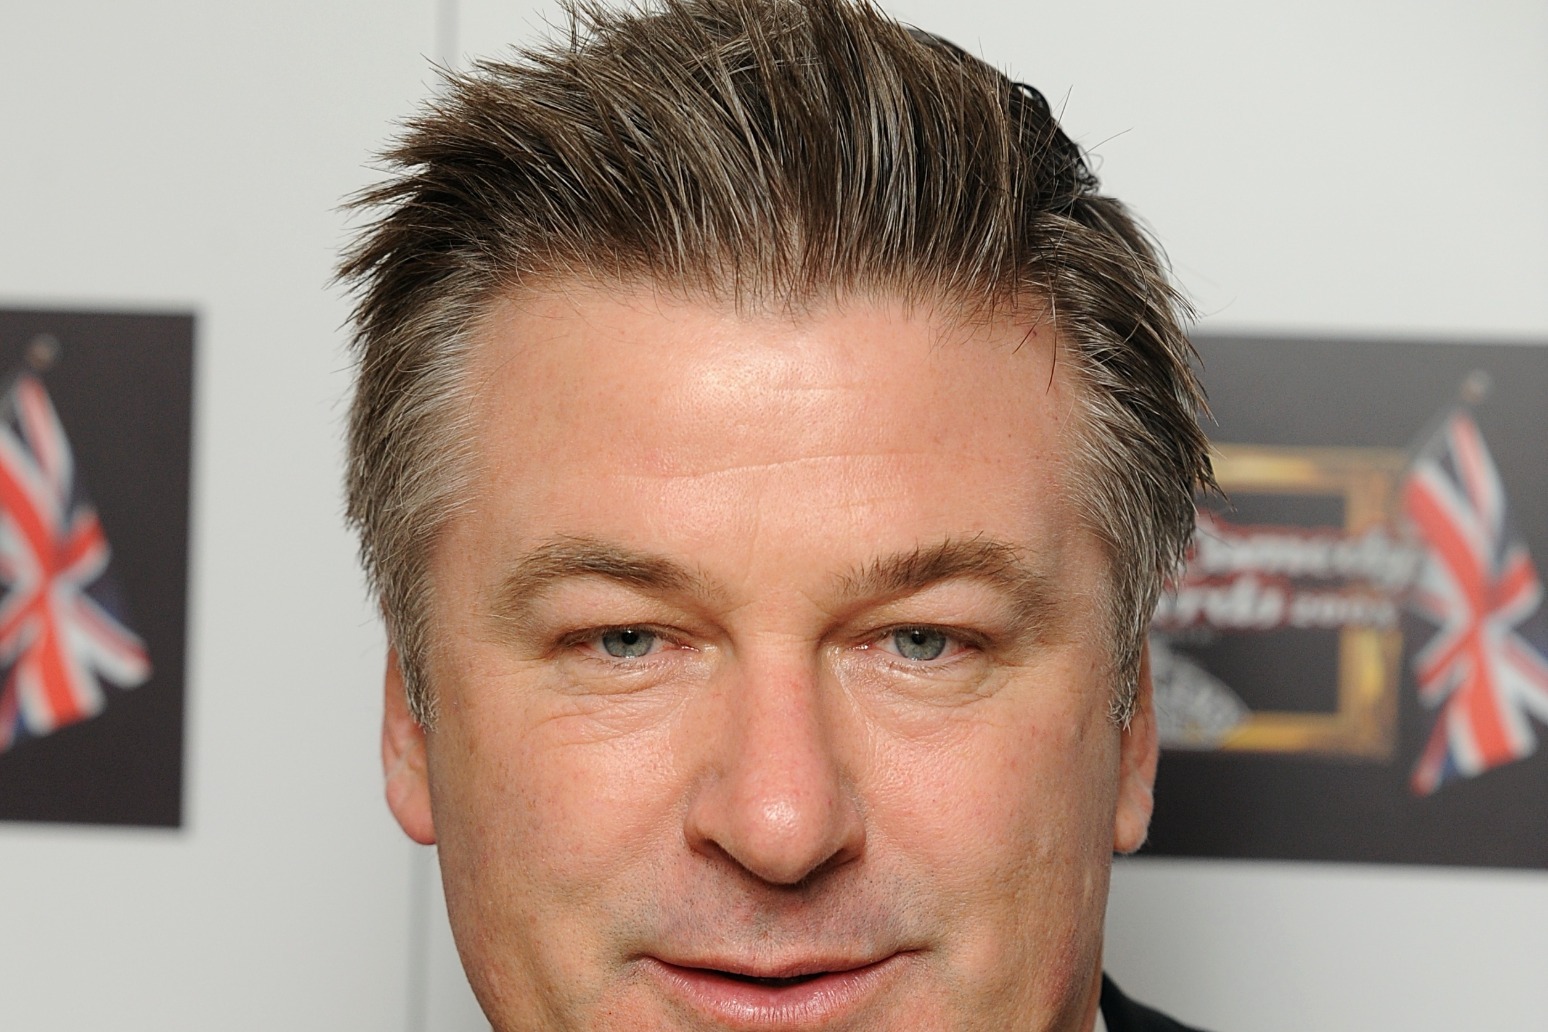 Alec Baldwin sued by family of cinematographer killed on set 